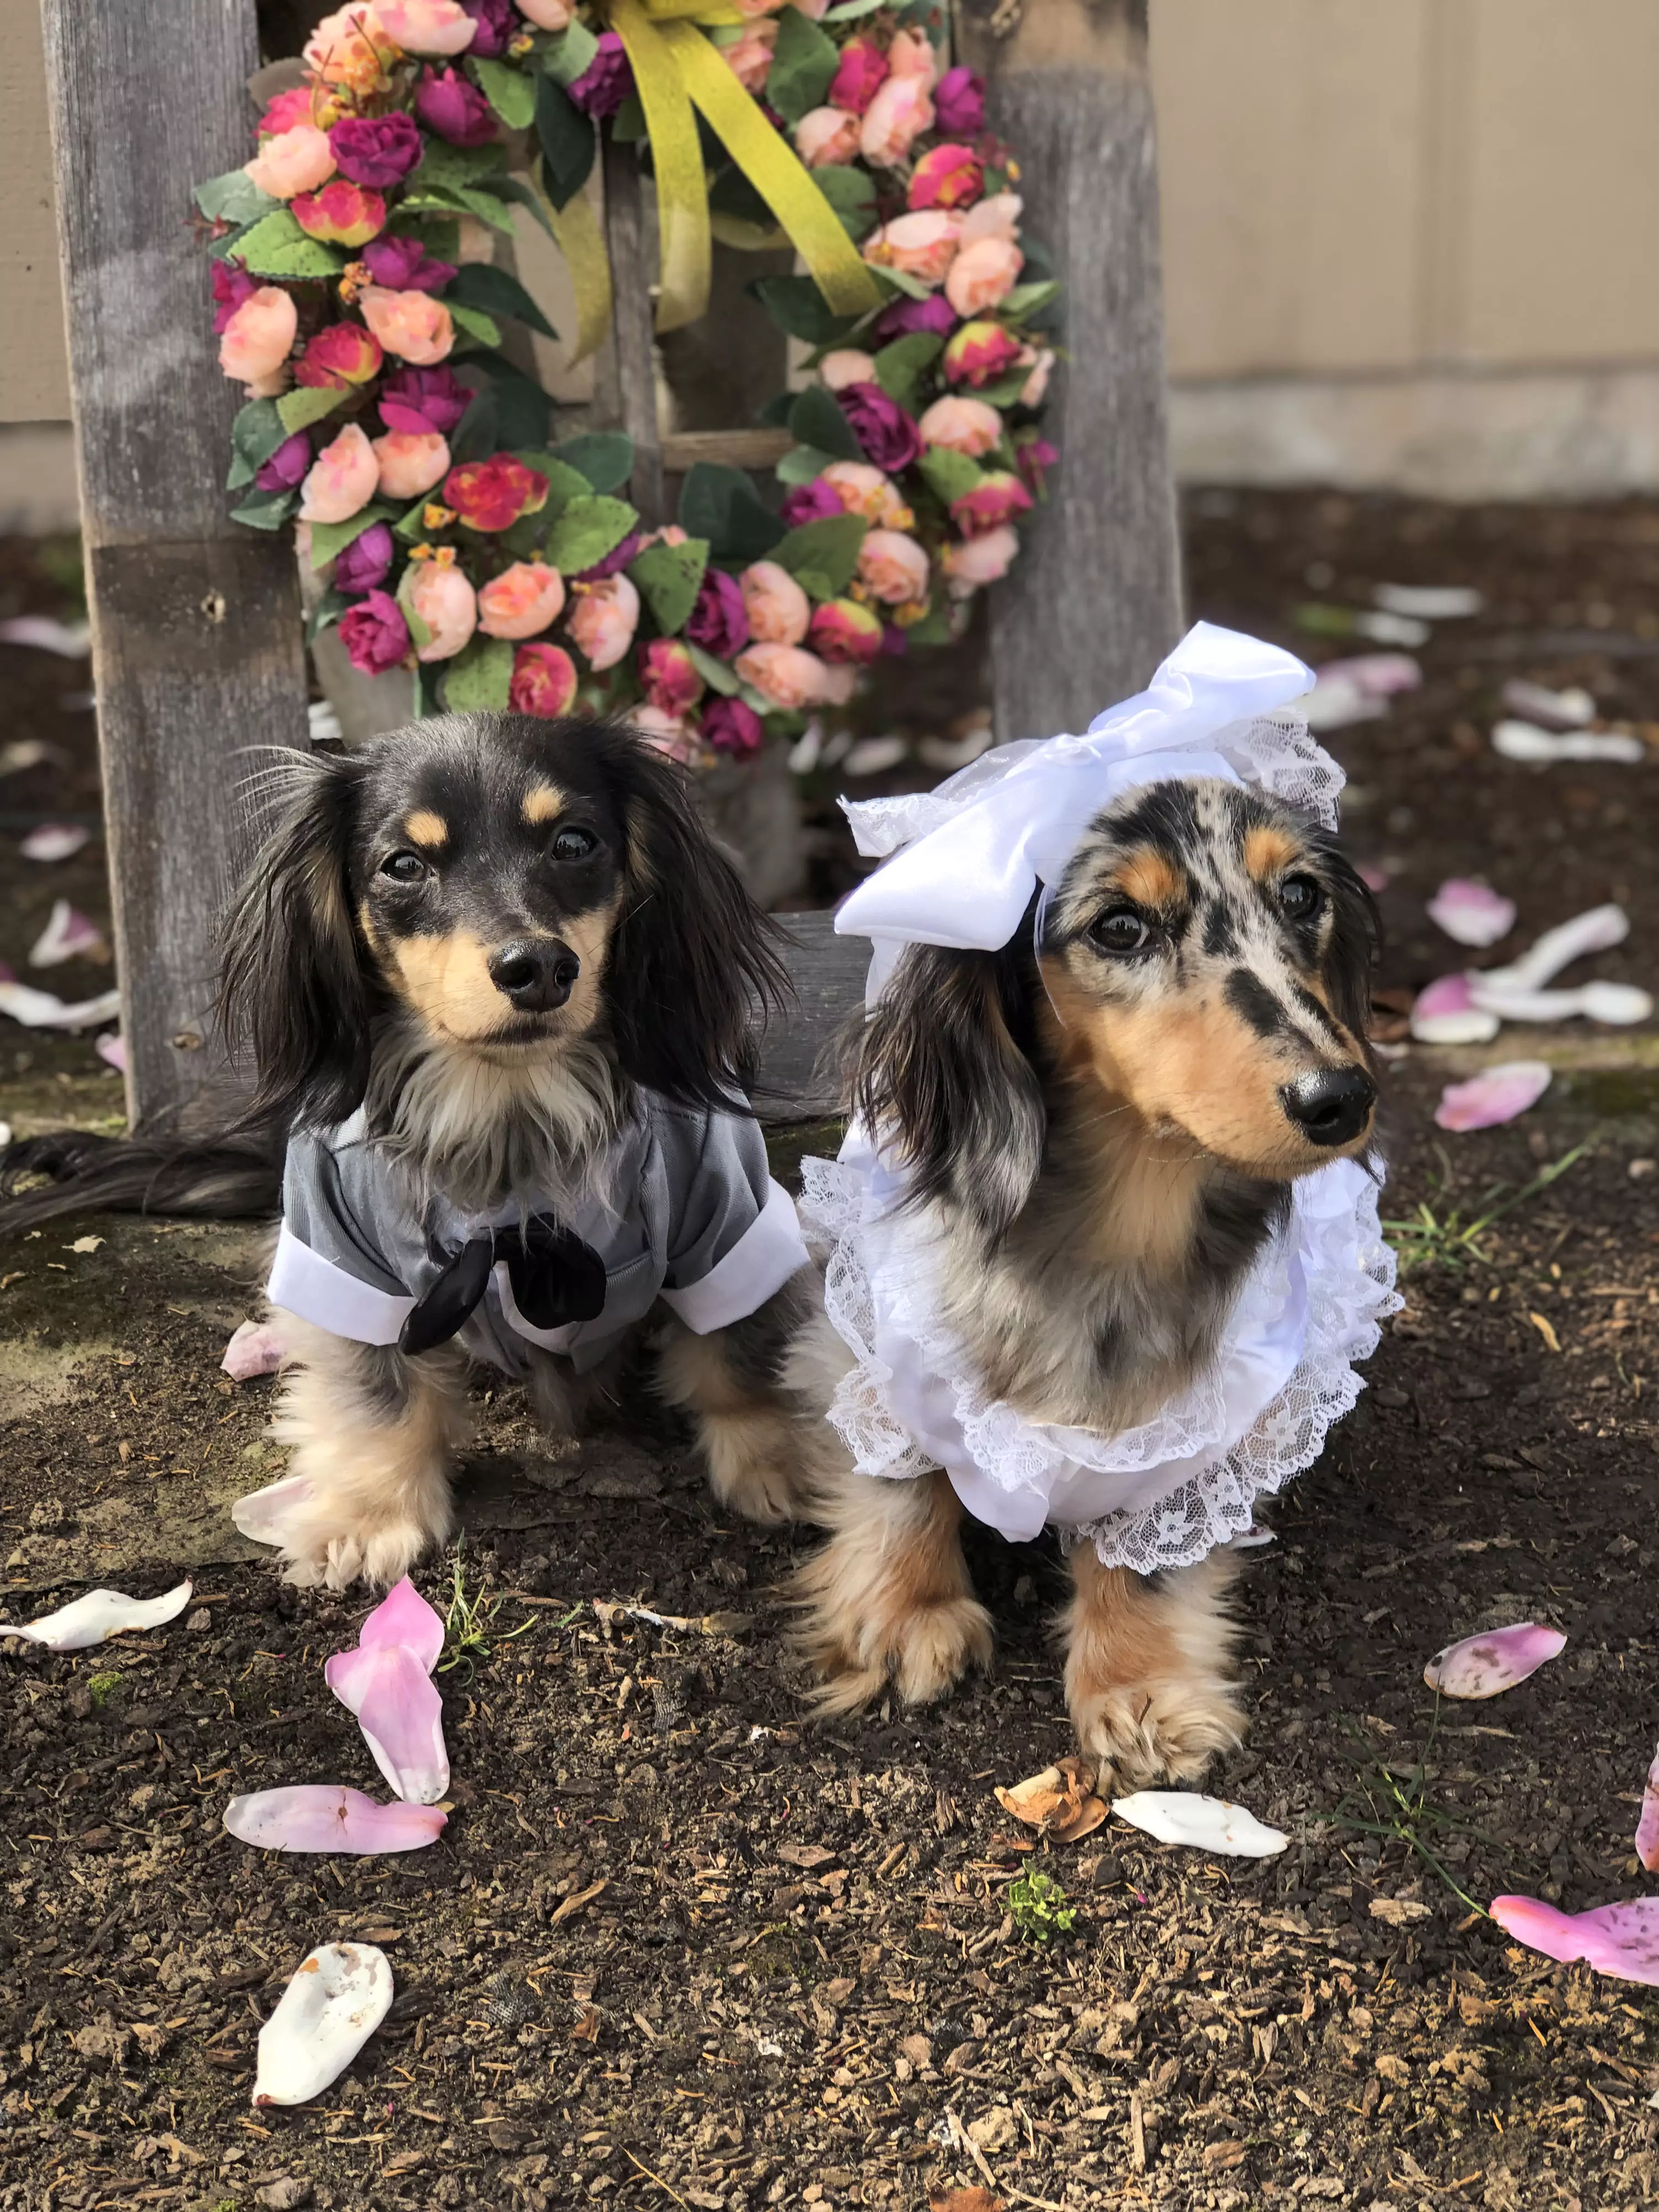 Abram and Erin decided the loved up pooches deserved a wedding ceremony. (